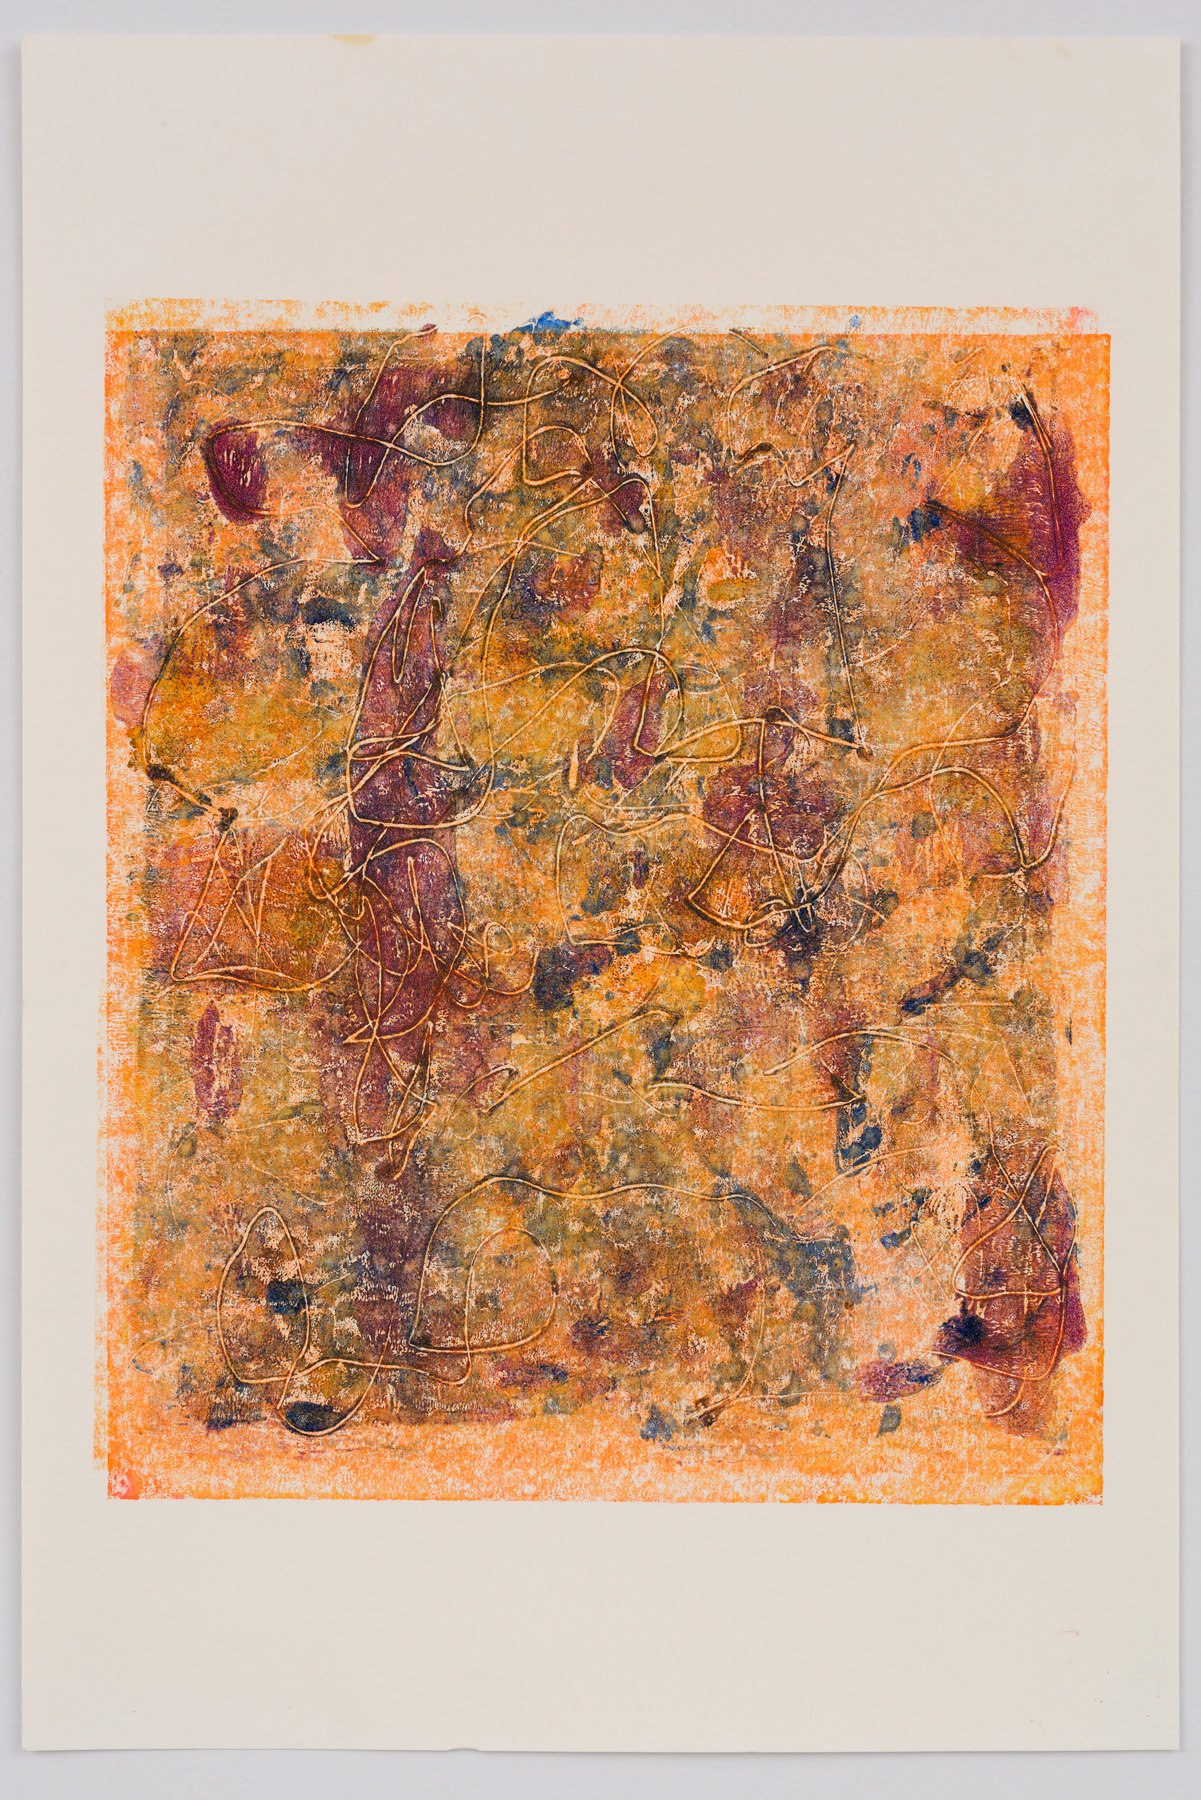  Untitled (ochre-orange-purple)   2022   Oil on hot pressed Saunders Waterford paper   Paper size: 51 x 34 cm, Print size: 32 x 28 cm   Monoprint (one of one)  